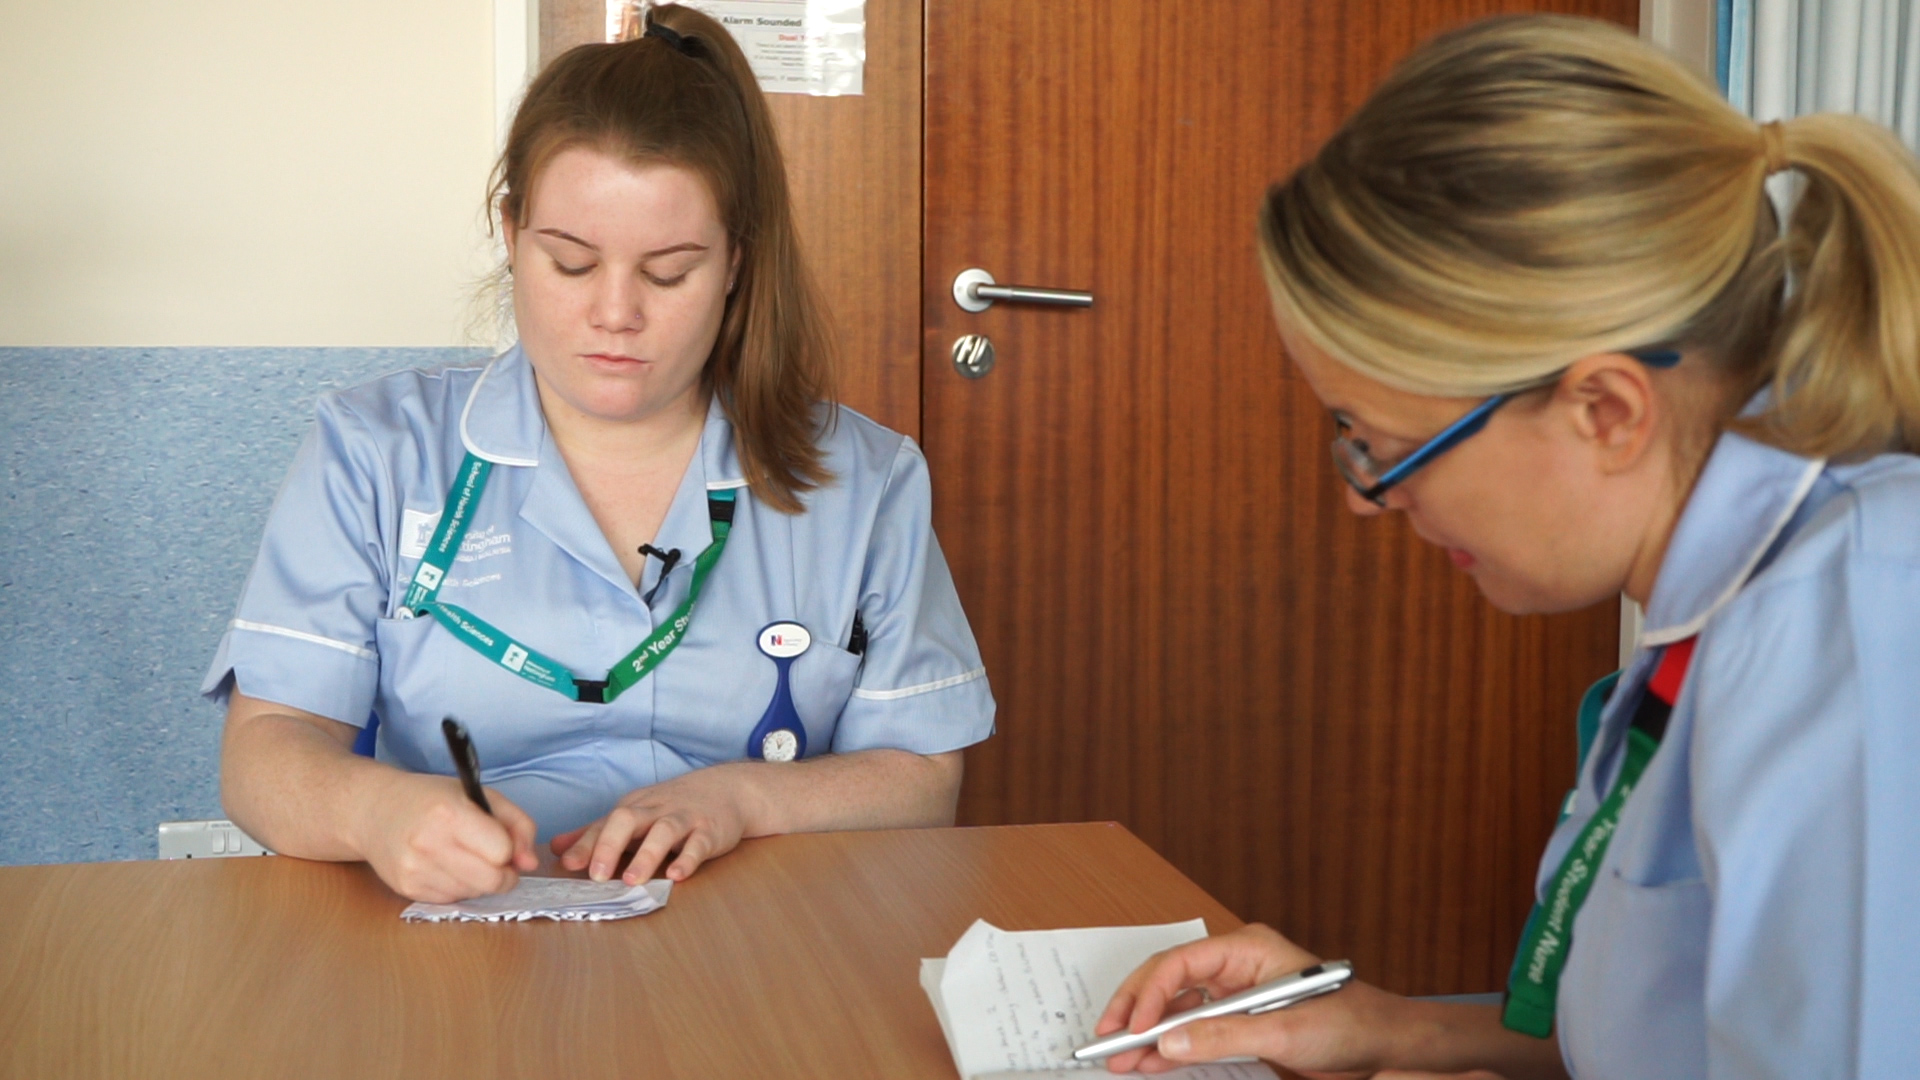 Student nurses sitting together with notepads